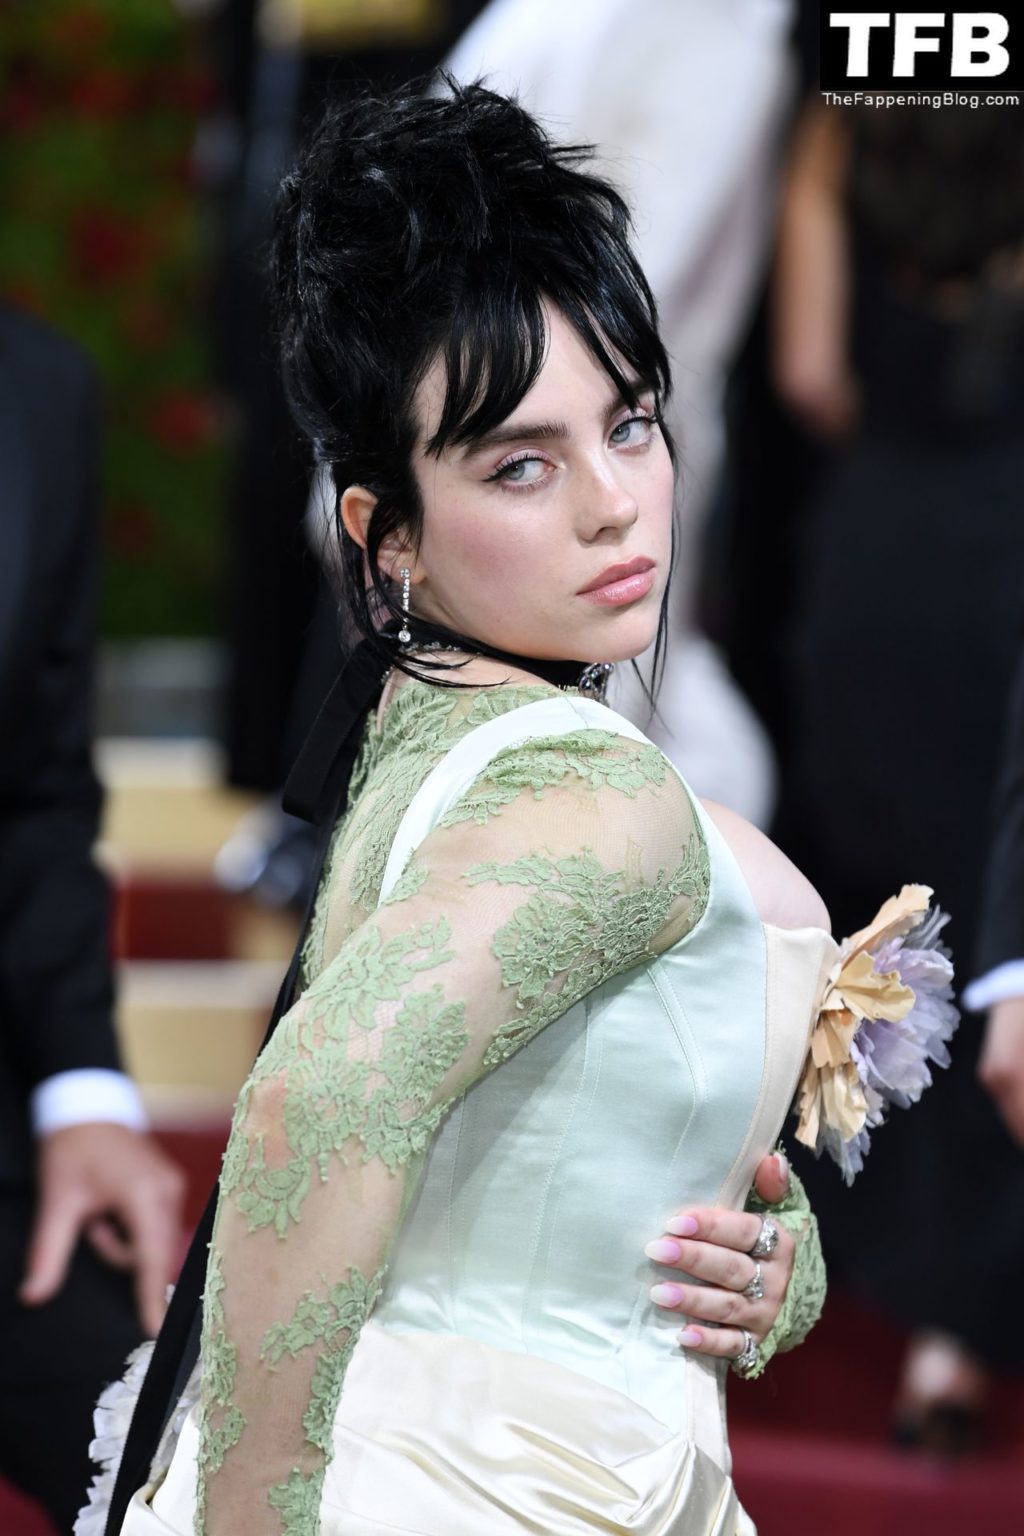 Billie Eilish Sexy The Fappening Blog 106 1024x1536 - Billie Eilish Showcases Nice Cleavage at The 2022 Met Gala in NYC (155 Photos)